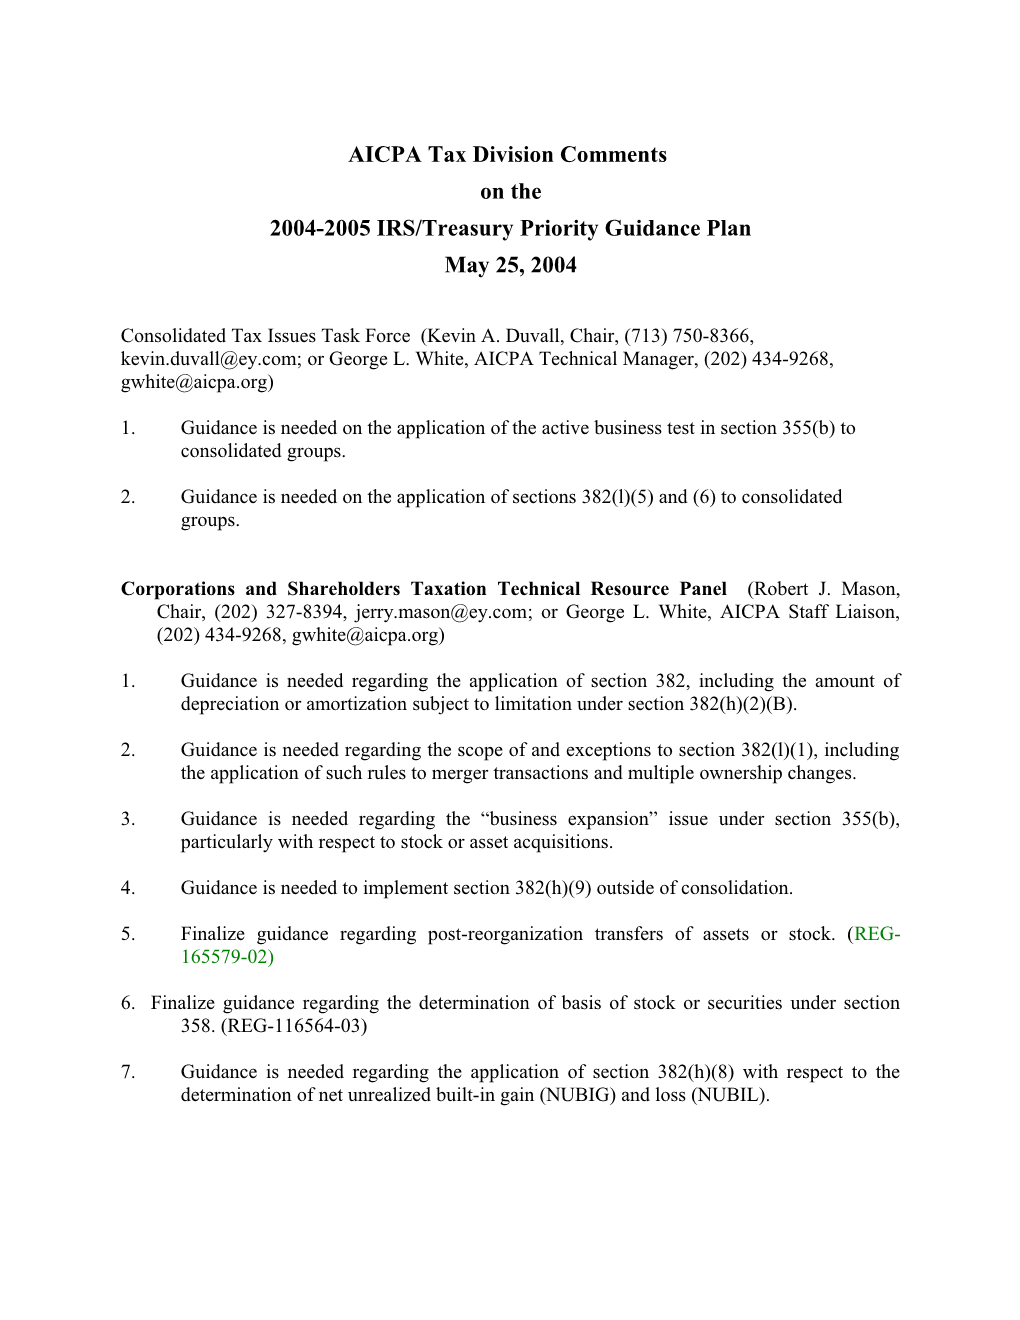 Consolidated Tax Issues Task Force (Kevin A